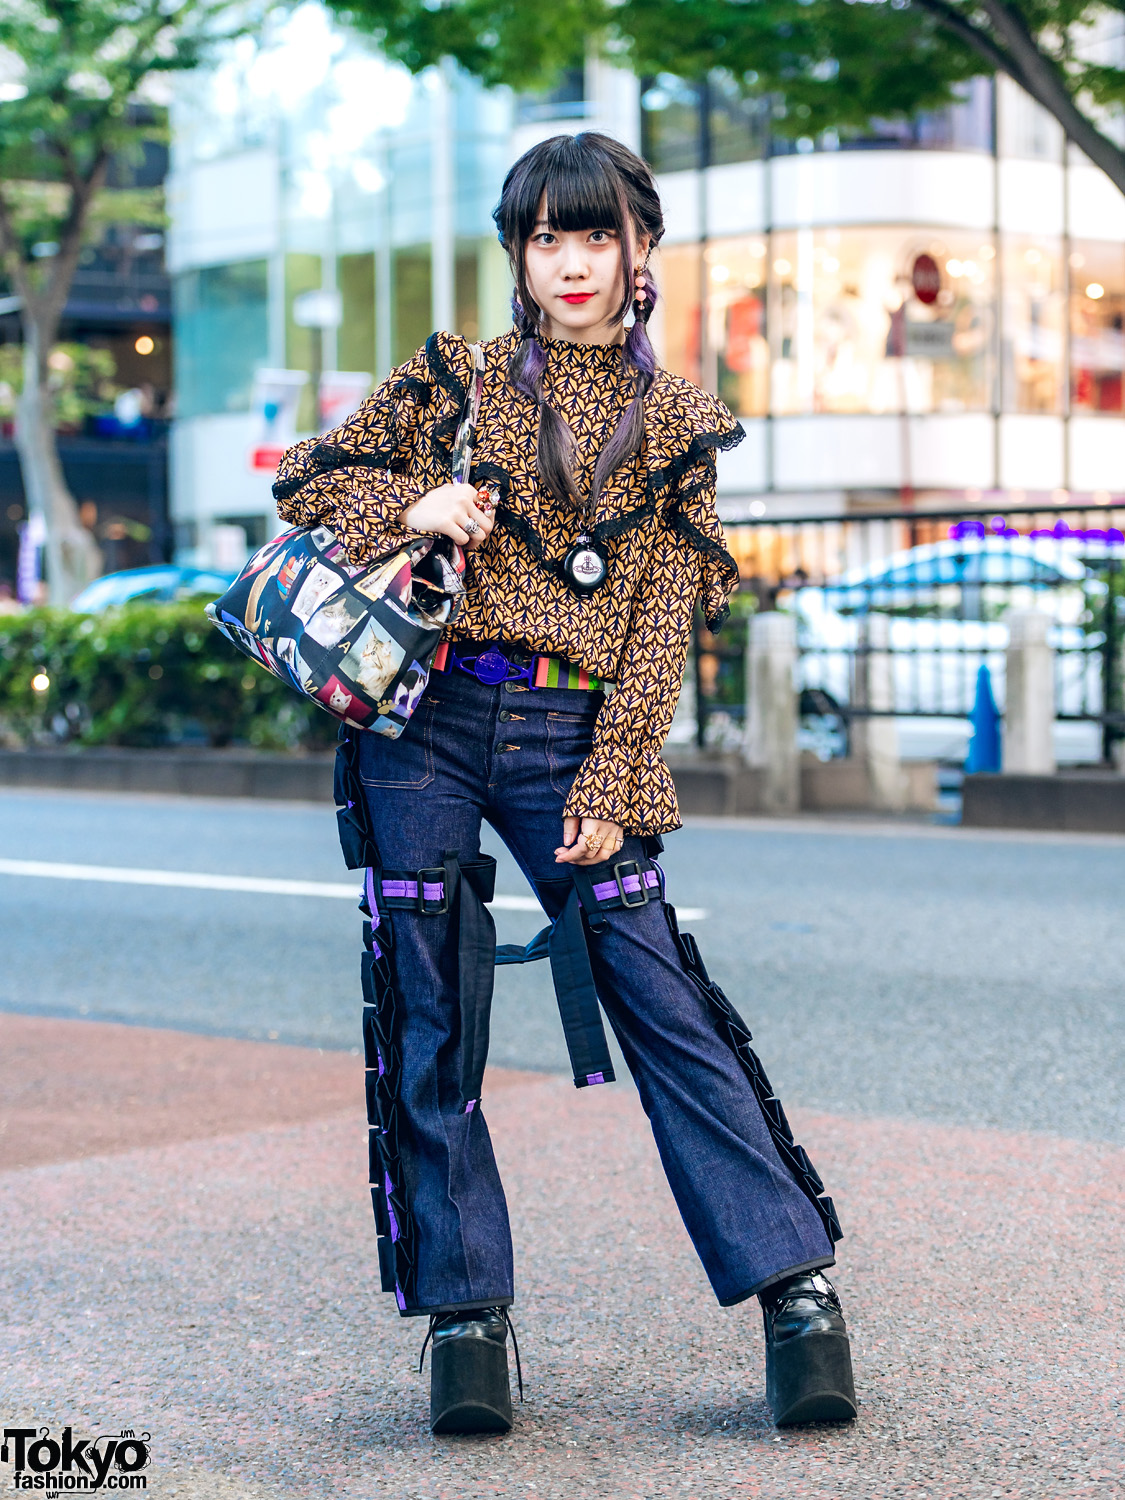 Harajuku Girl in Ripped Jeans Fashion w/ Lace Tube Top, GYDA Ripped Jeans,  Resexxy Heels, Vivienne Westwood Bag, Louis Vuitton and Coach Accessories –  Tokyo Fashion